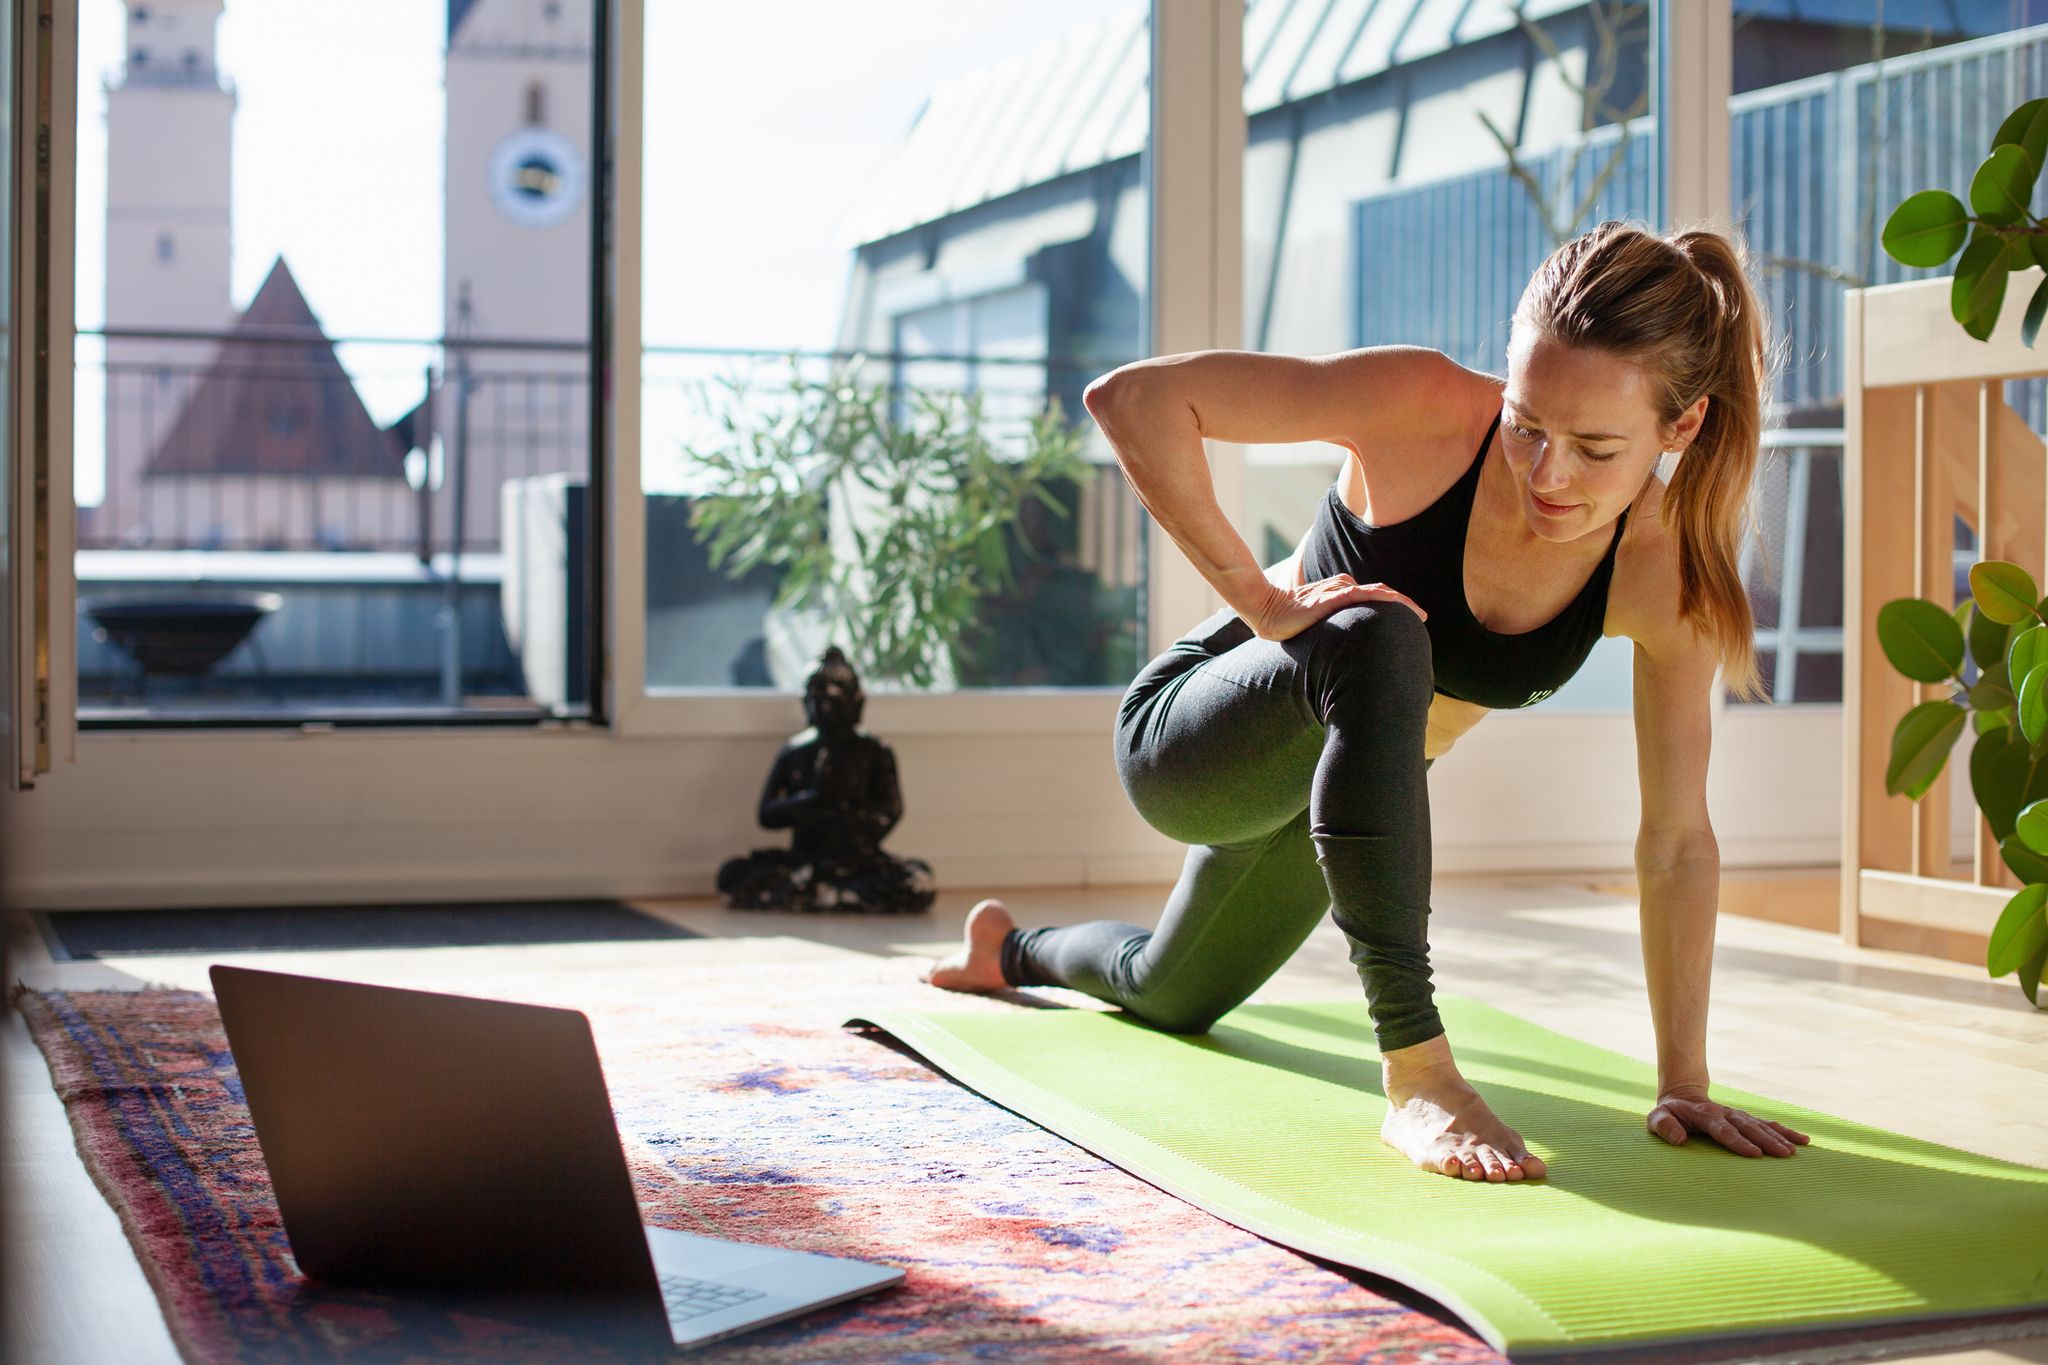 Lululemon are offering free yoga classes for runners